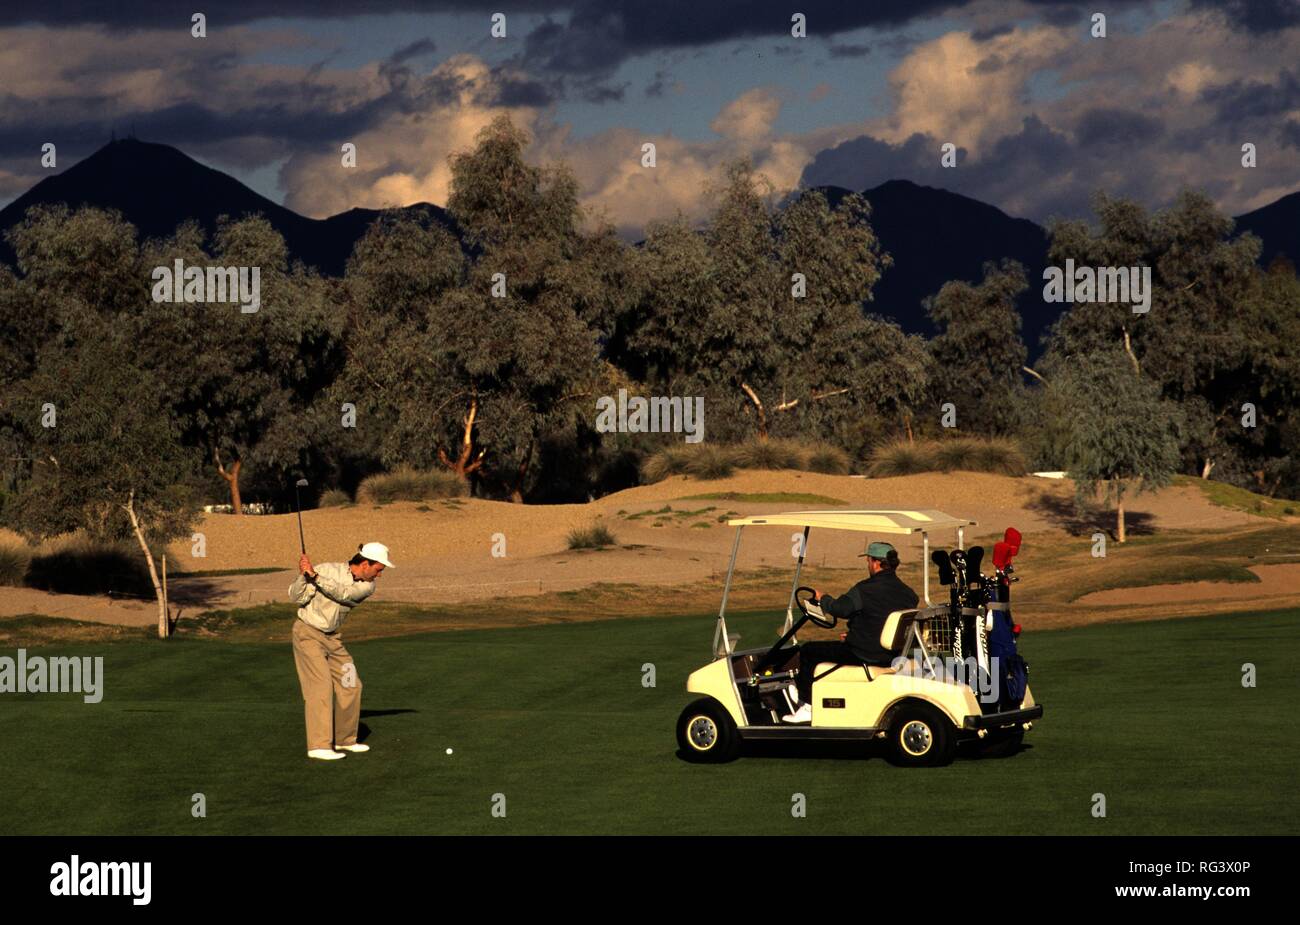 USA, United States of America, Arizona: golf cours in Phoenix. Hyatt Regency, Gainey Ranch Lakes Course. Stock Photo